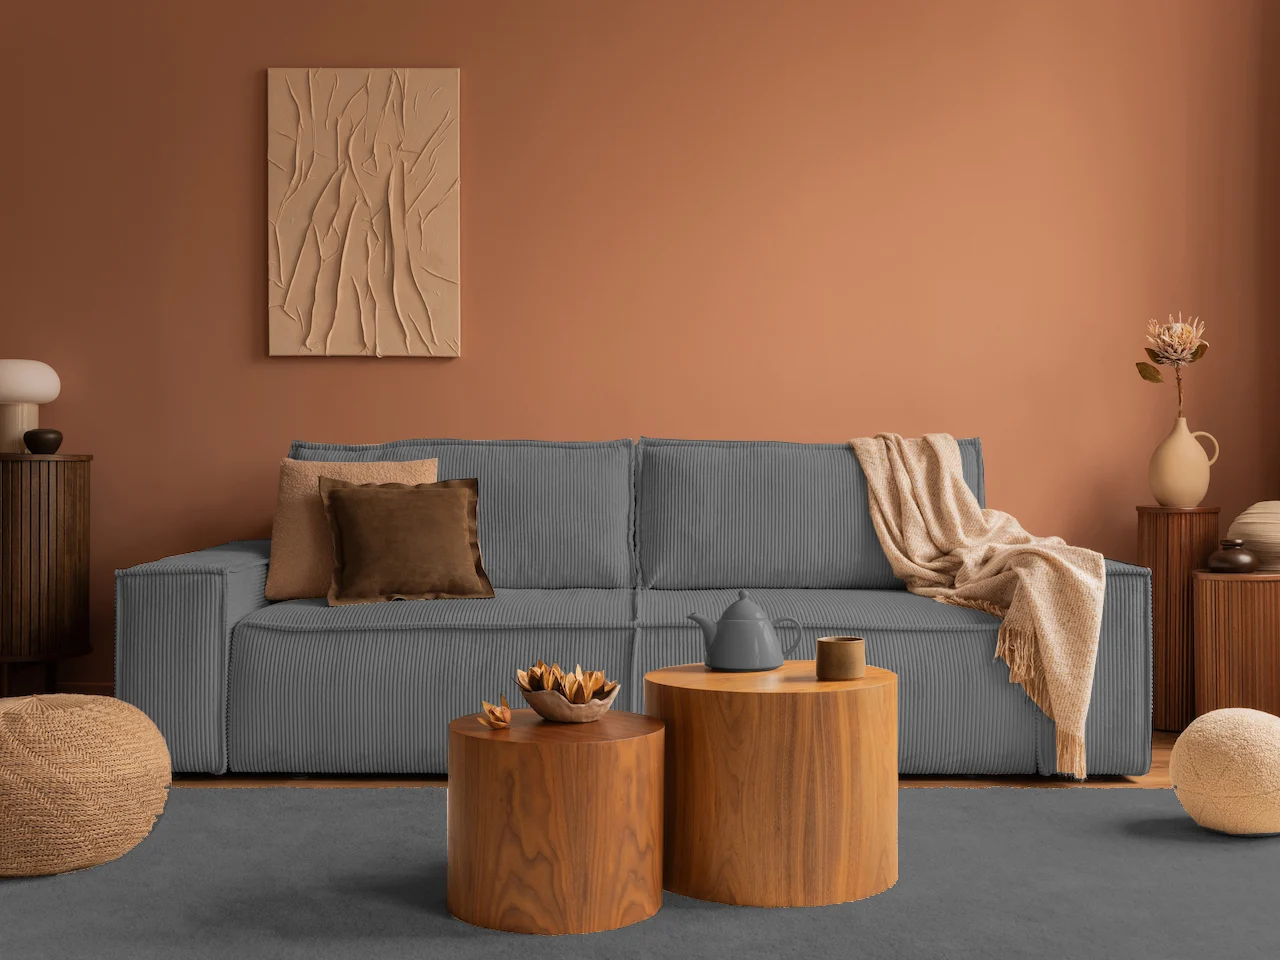 10 Harmonious Furniture Colors to Complement Brown Walls